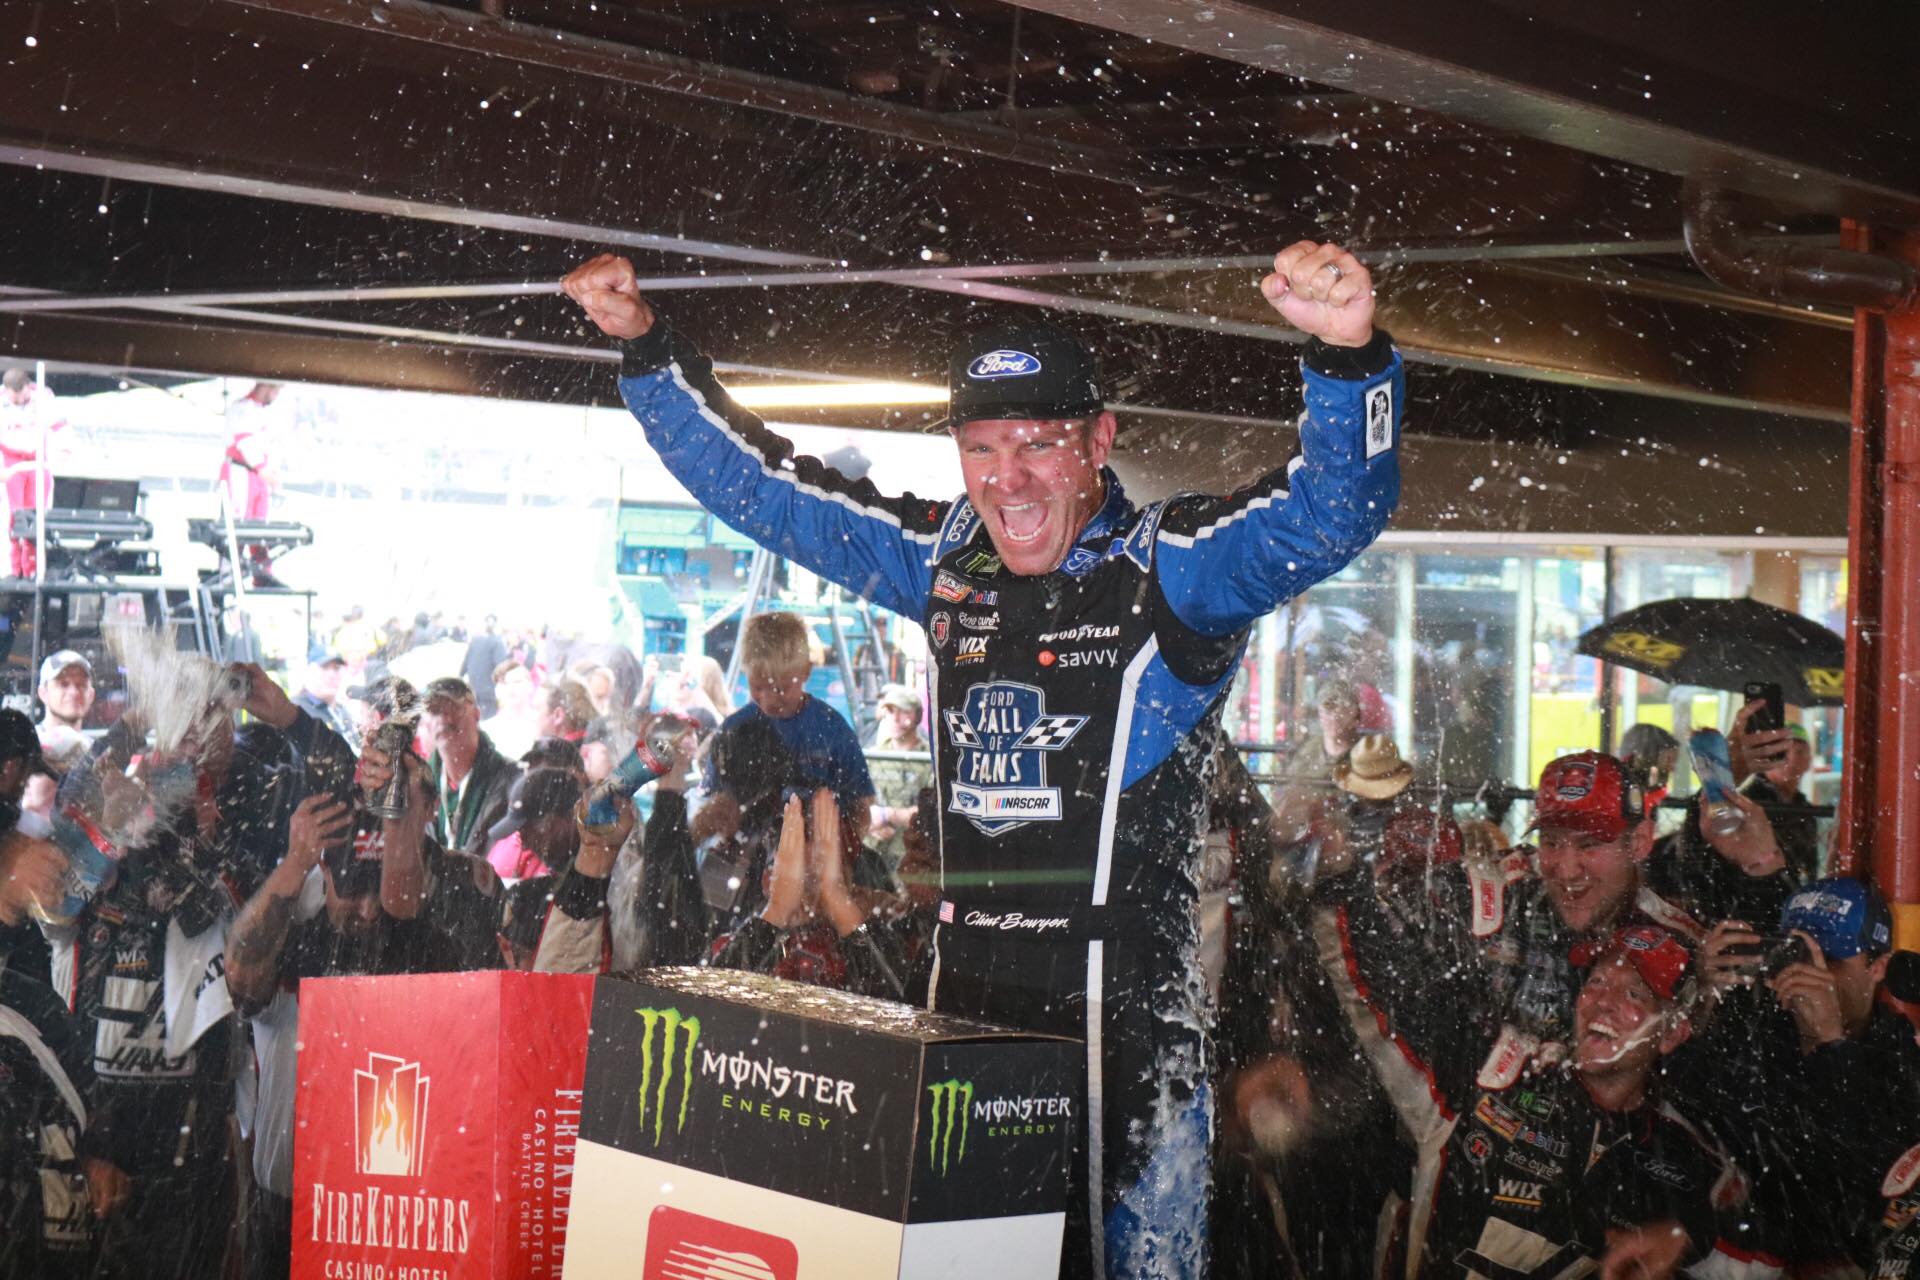 Experiencing a career renaissance, Clint Bowyer soaks up his victory at Michigan this past June. (Photo Credit: Kathleen Cassidy/TPF)